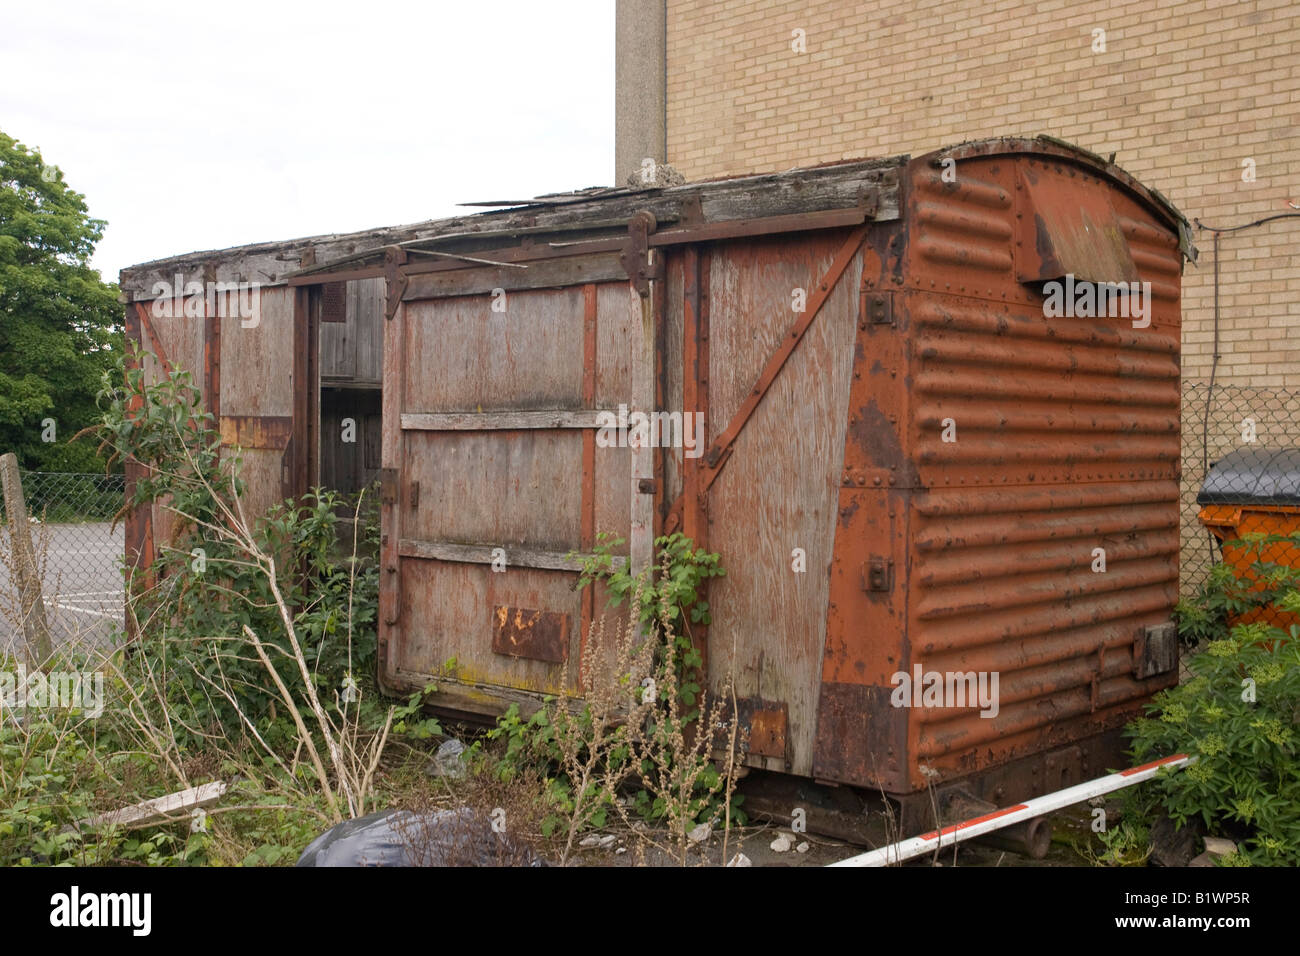 old wooden railway carriage Stock Photo